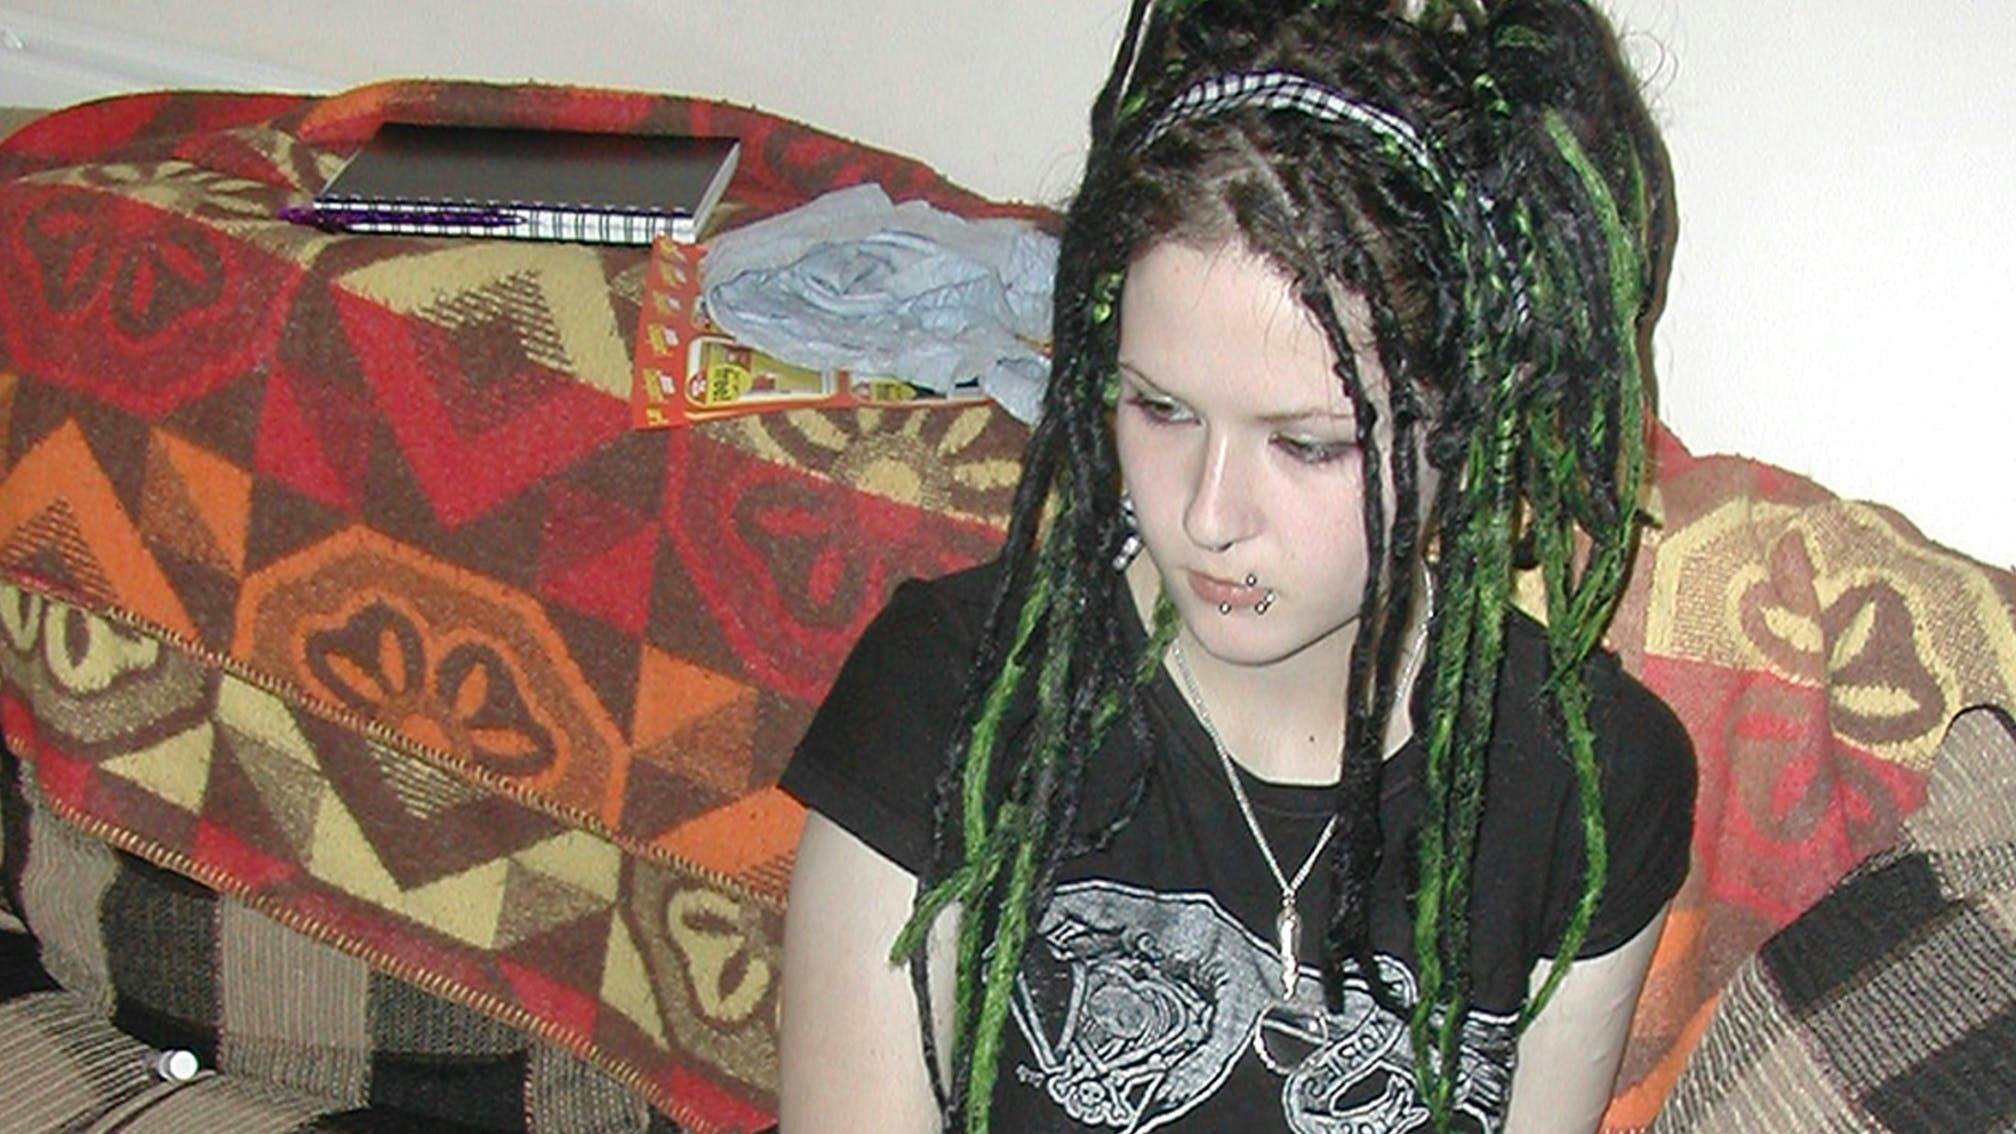 The legacy of Sophie Lancaster: “We should be embracing difference, not scared of it”